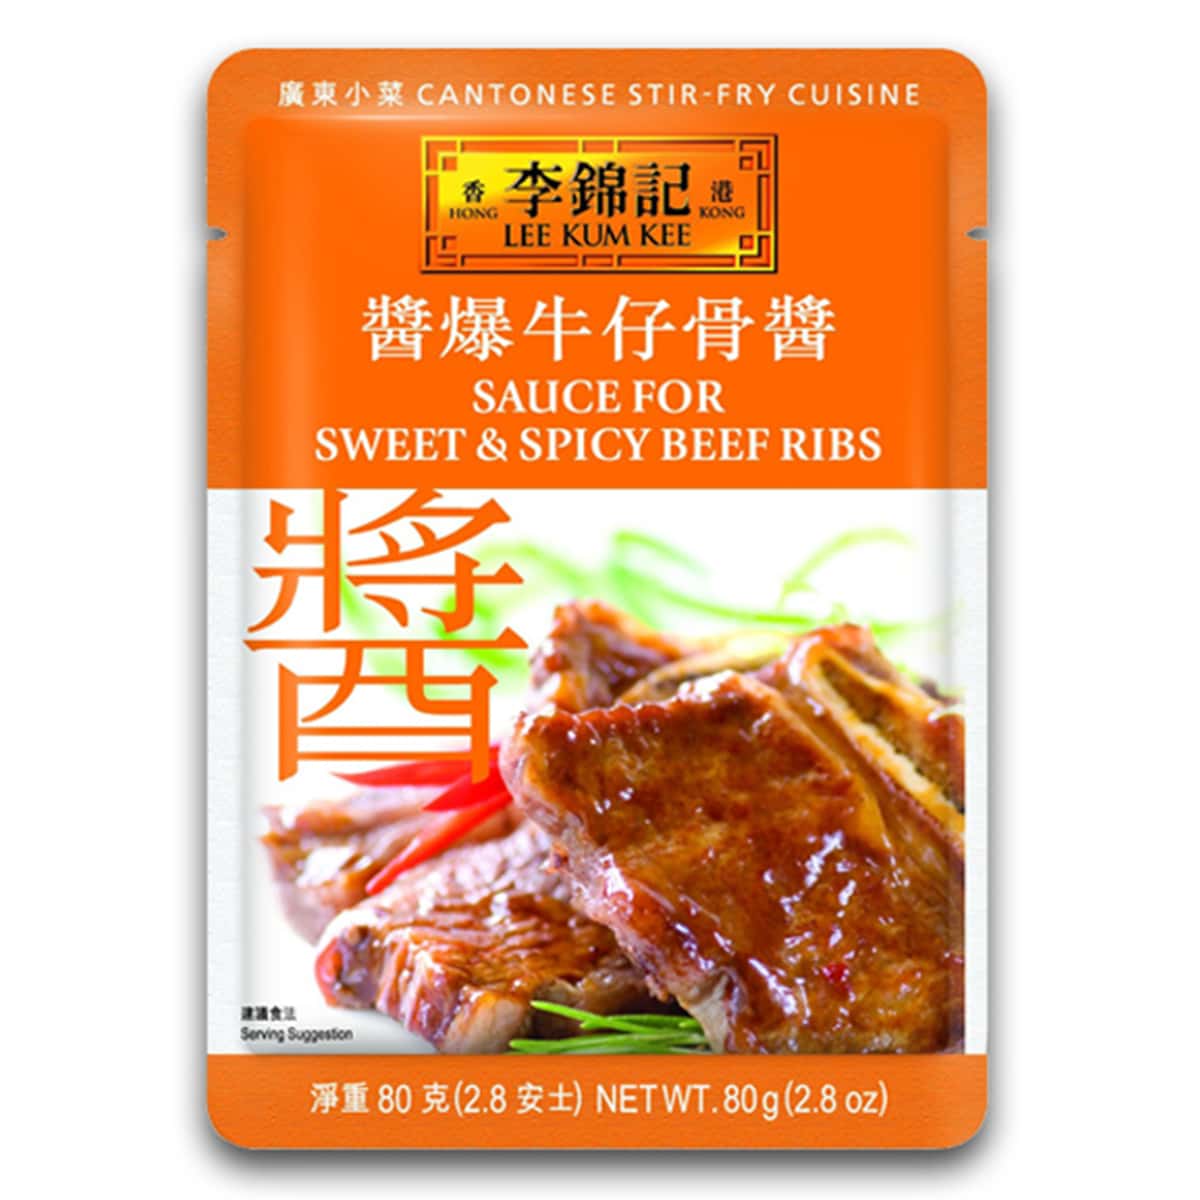 Buy Lee Kum Kee Sauce for Sweet and Spicy Beef Ribs - 80 gm